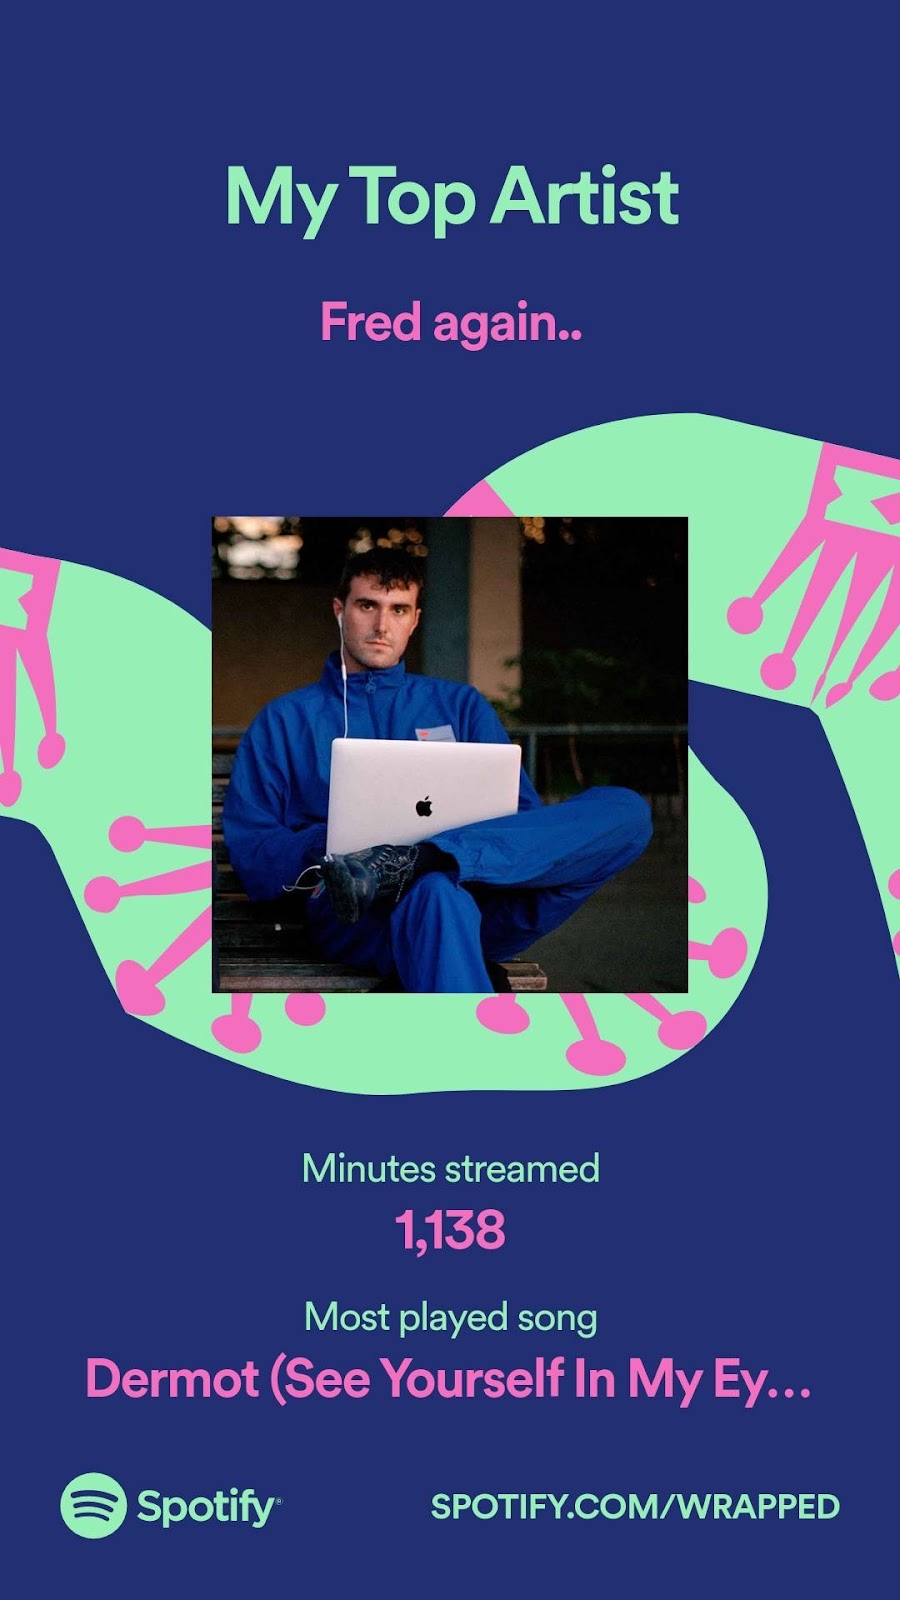 Spotify Screenshot showing my top artist is Fred again.. with 1138 minutes streamed and most played song being Dermot (See Yourself in My Eyes)